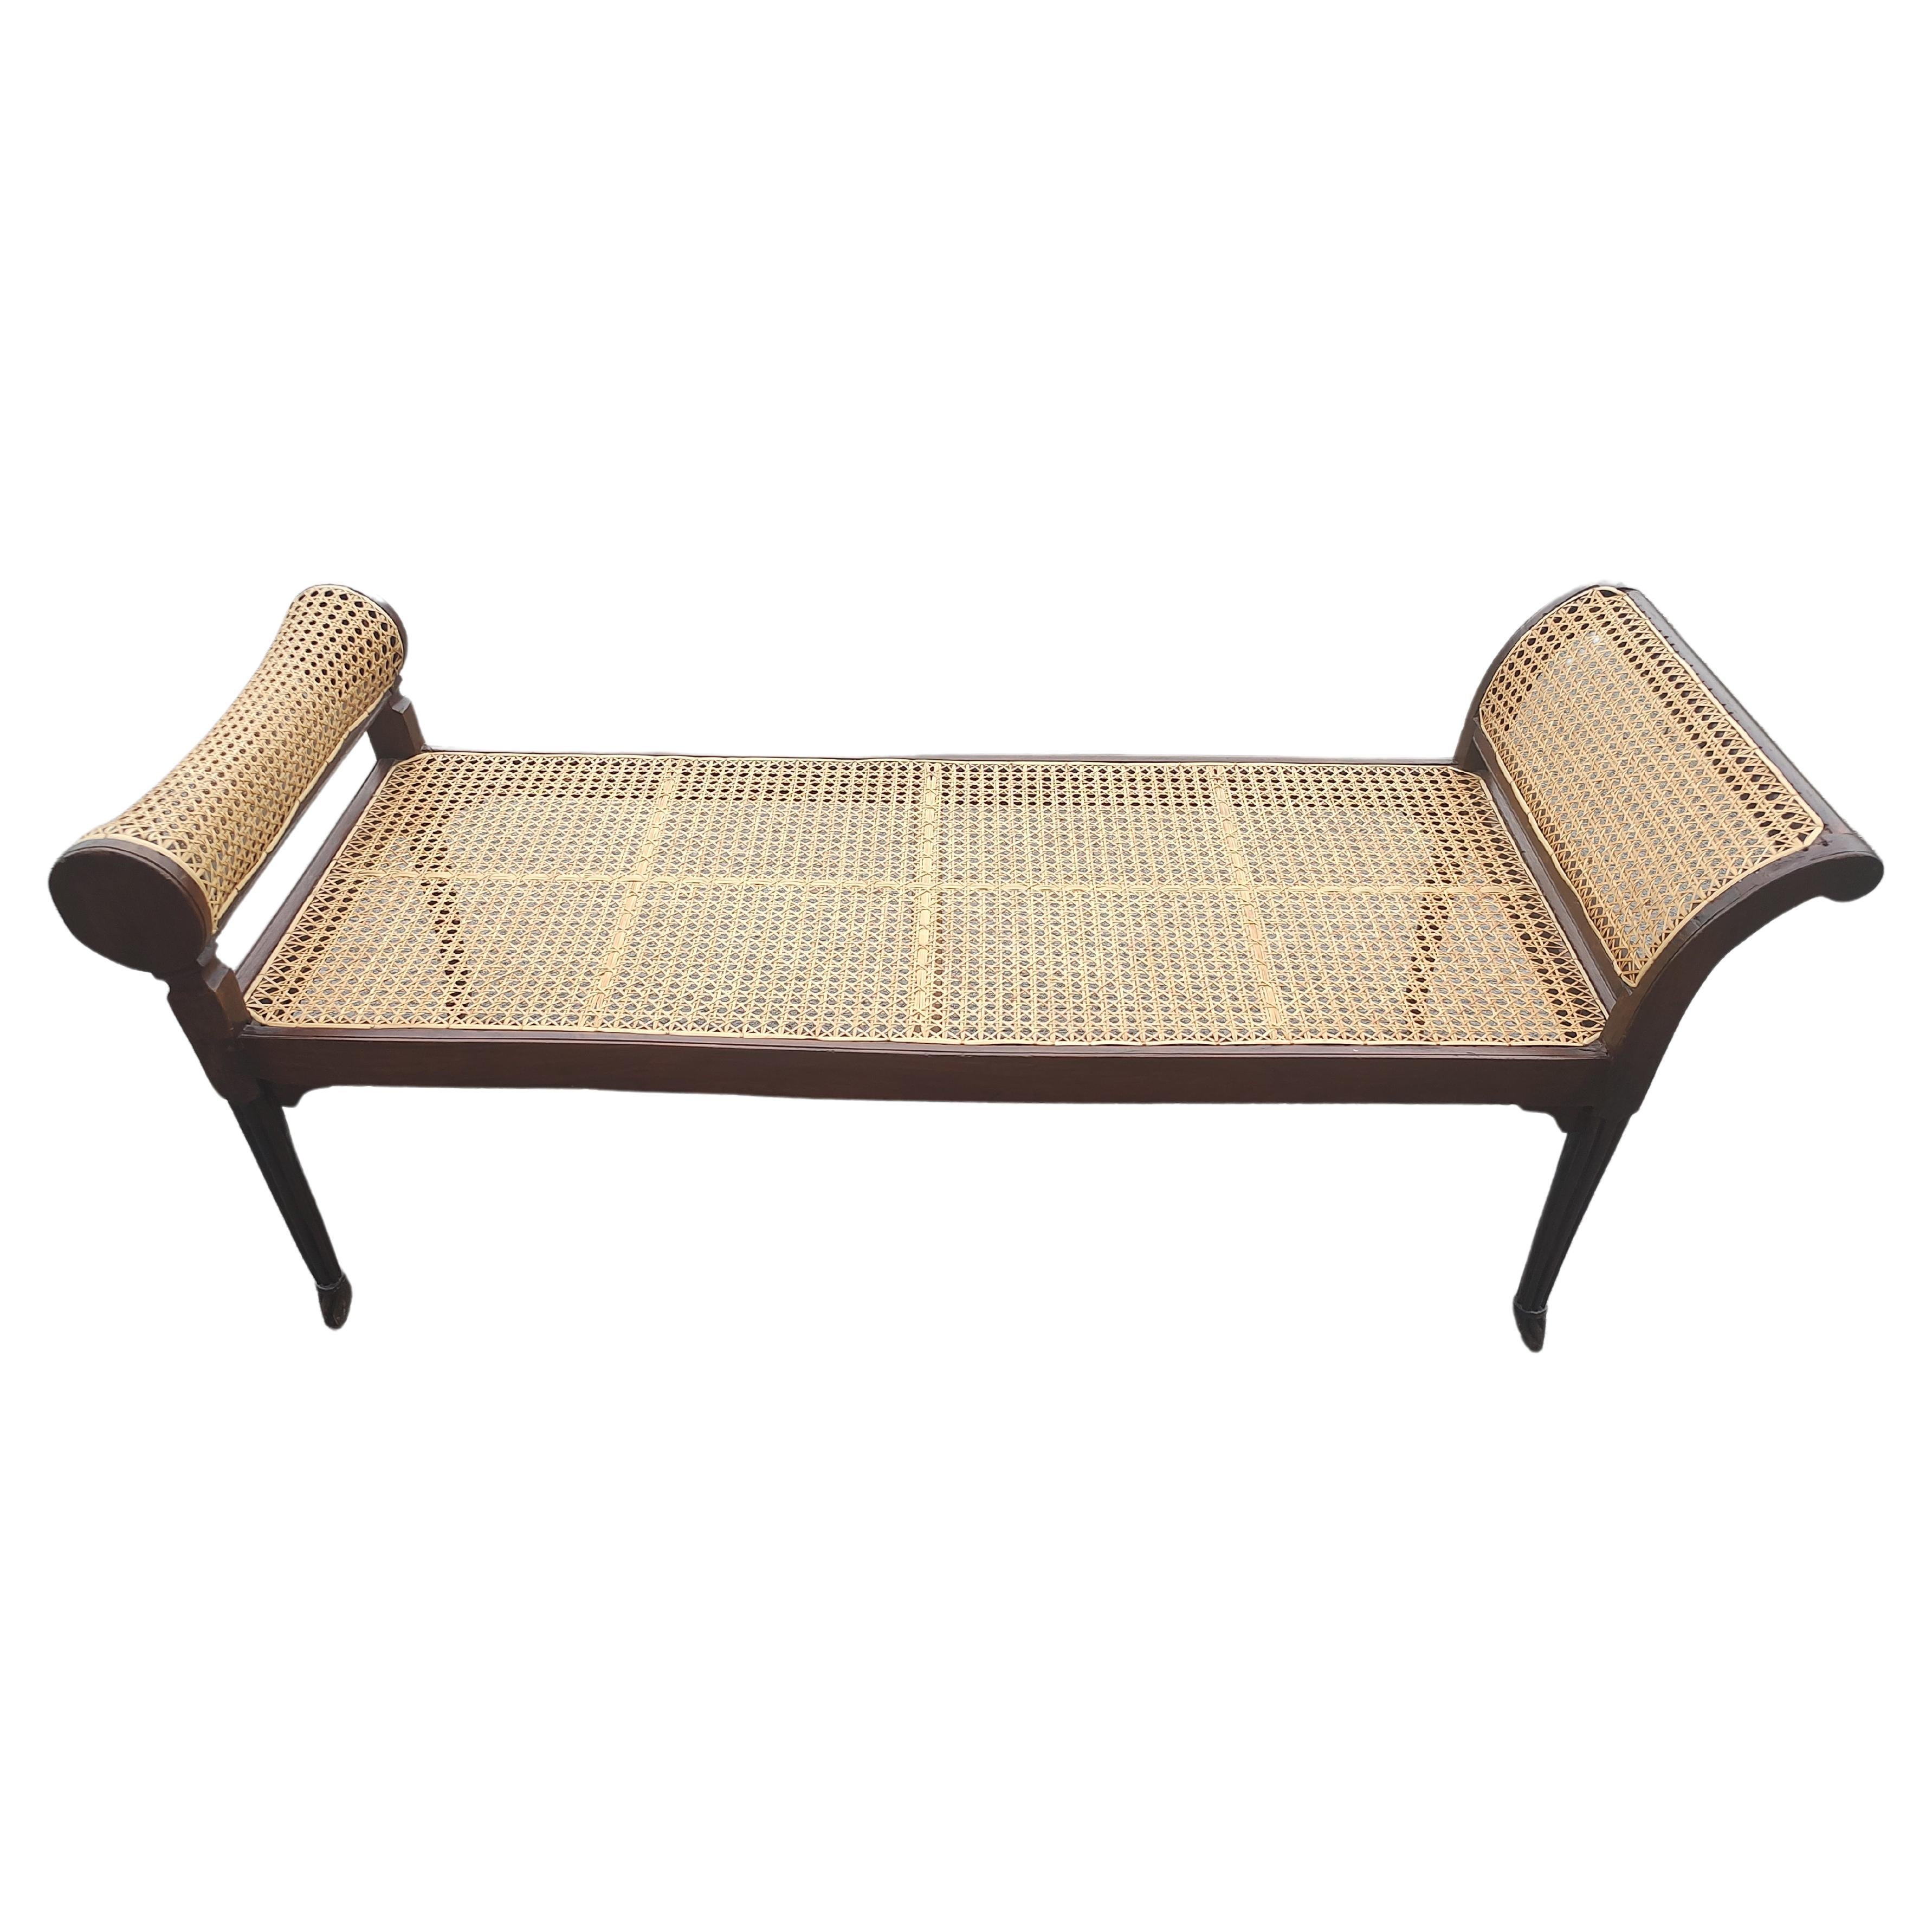 19thC English Regency Caned Recamier Style Window Seat with Reeded legs Mahogany For Sale 2